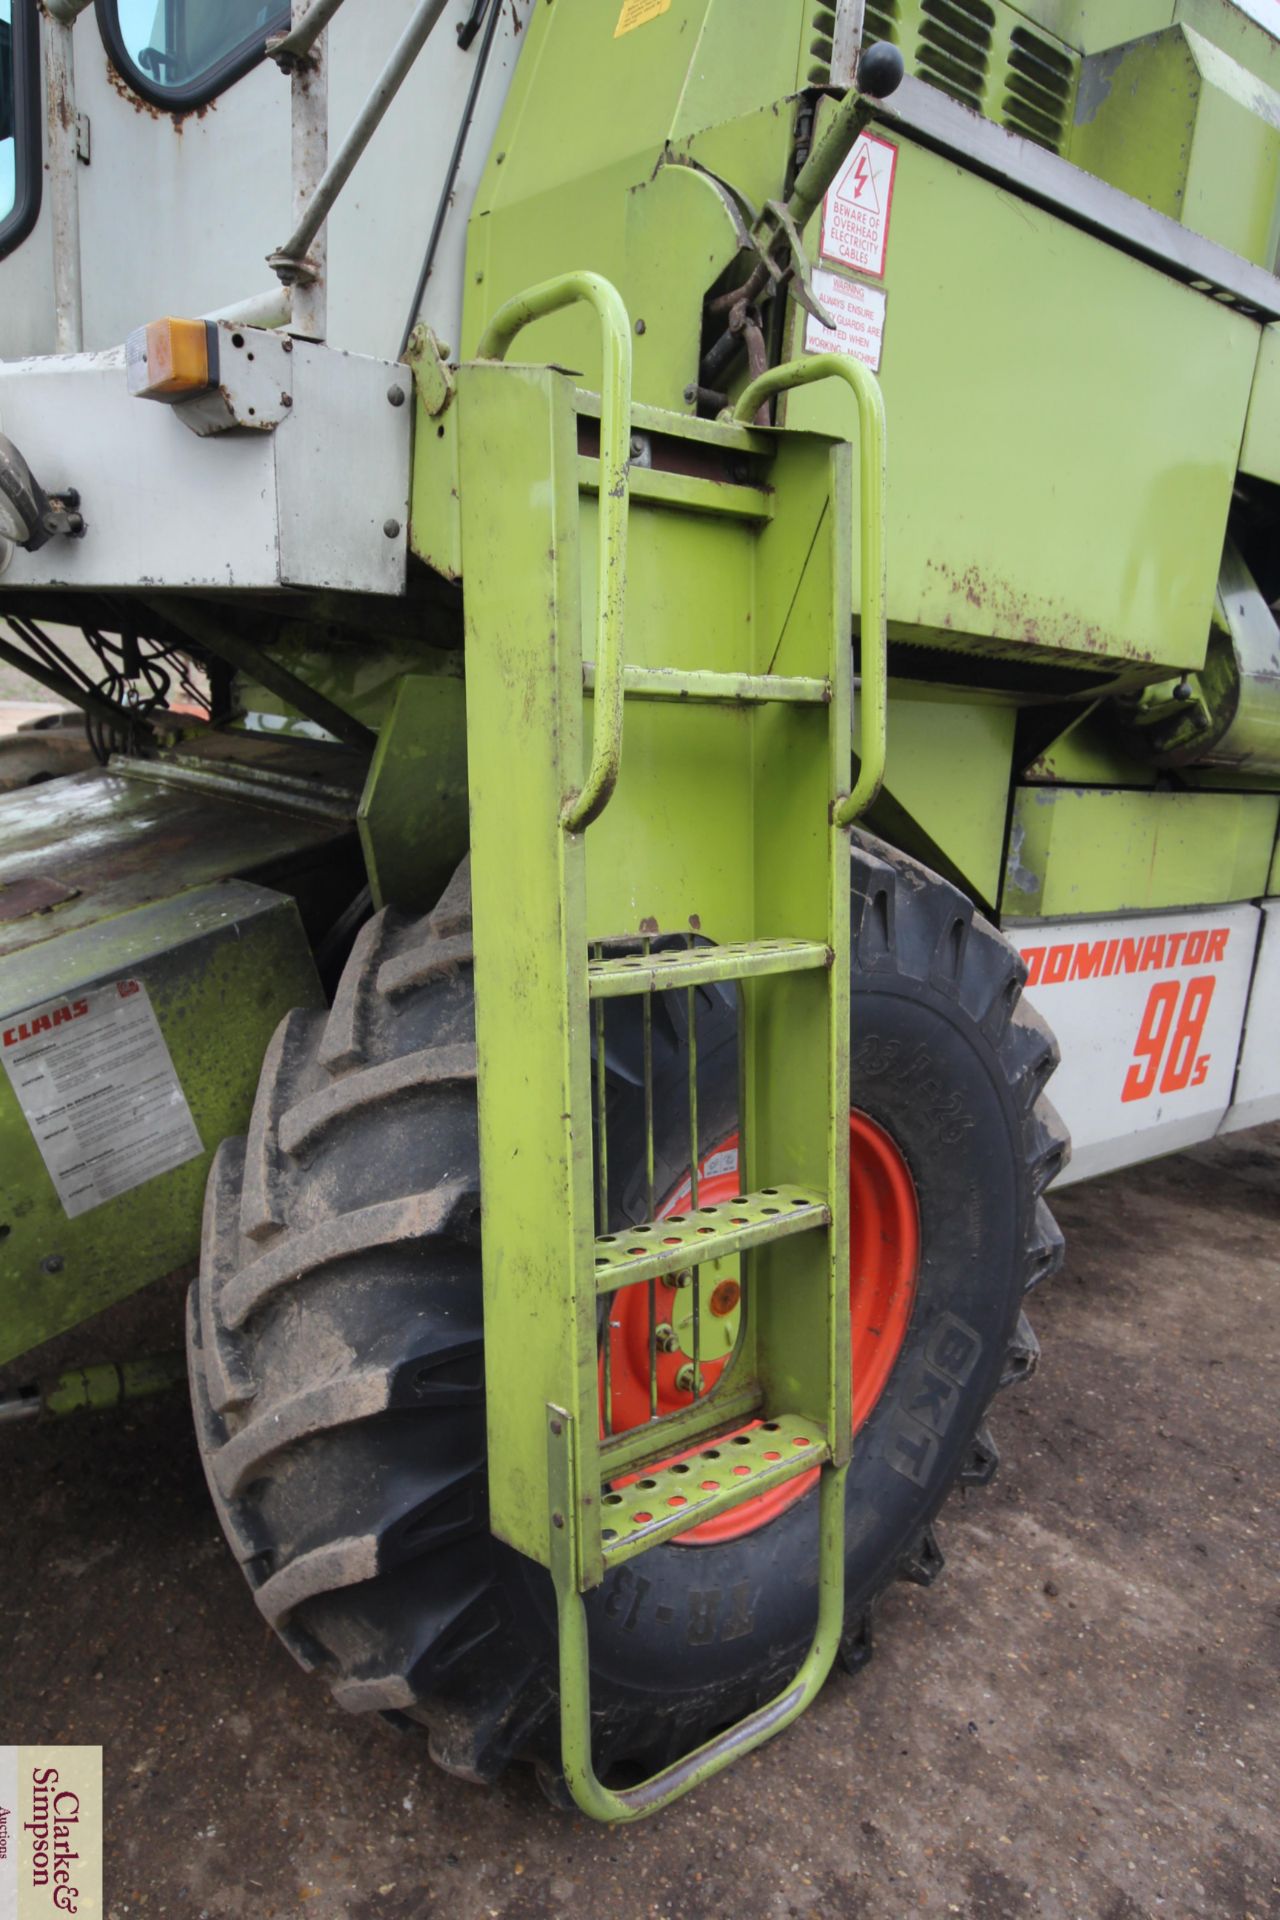 ** UPDATED HOURS ** Claas Dominator 98S combine. Registration E799 APU. Date of first registration - Image 14 of 120